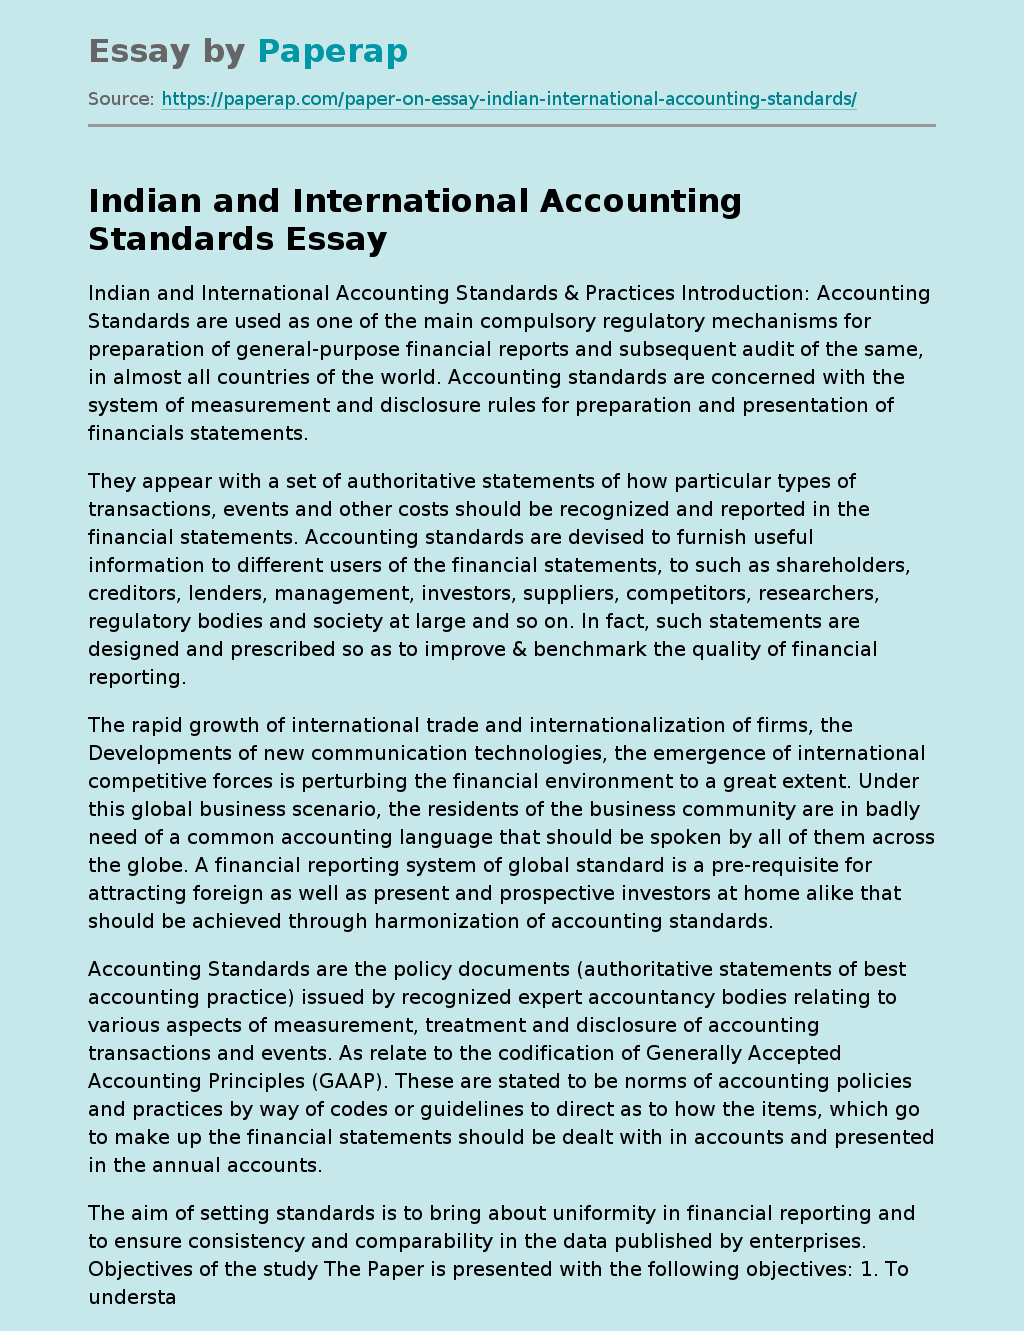 Indian and International Accounting Standards